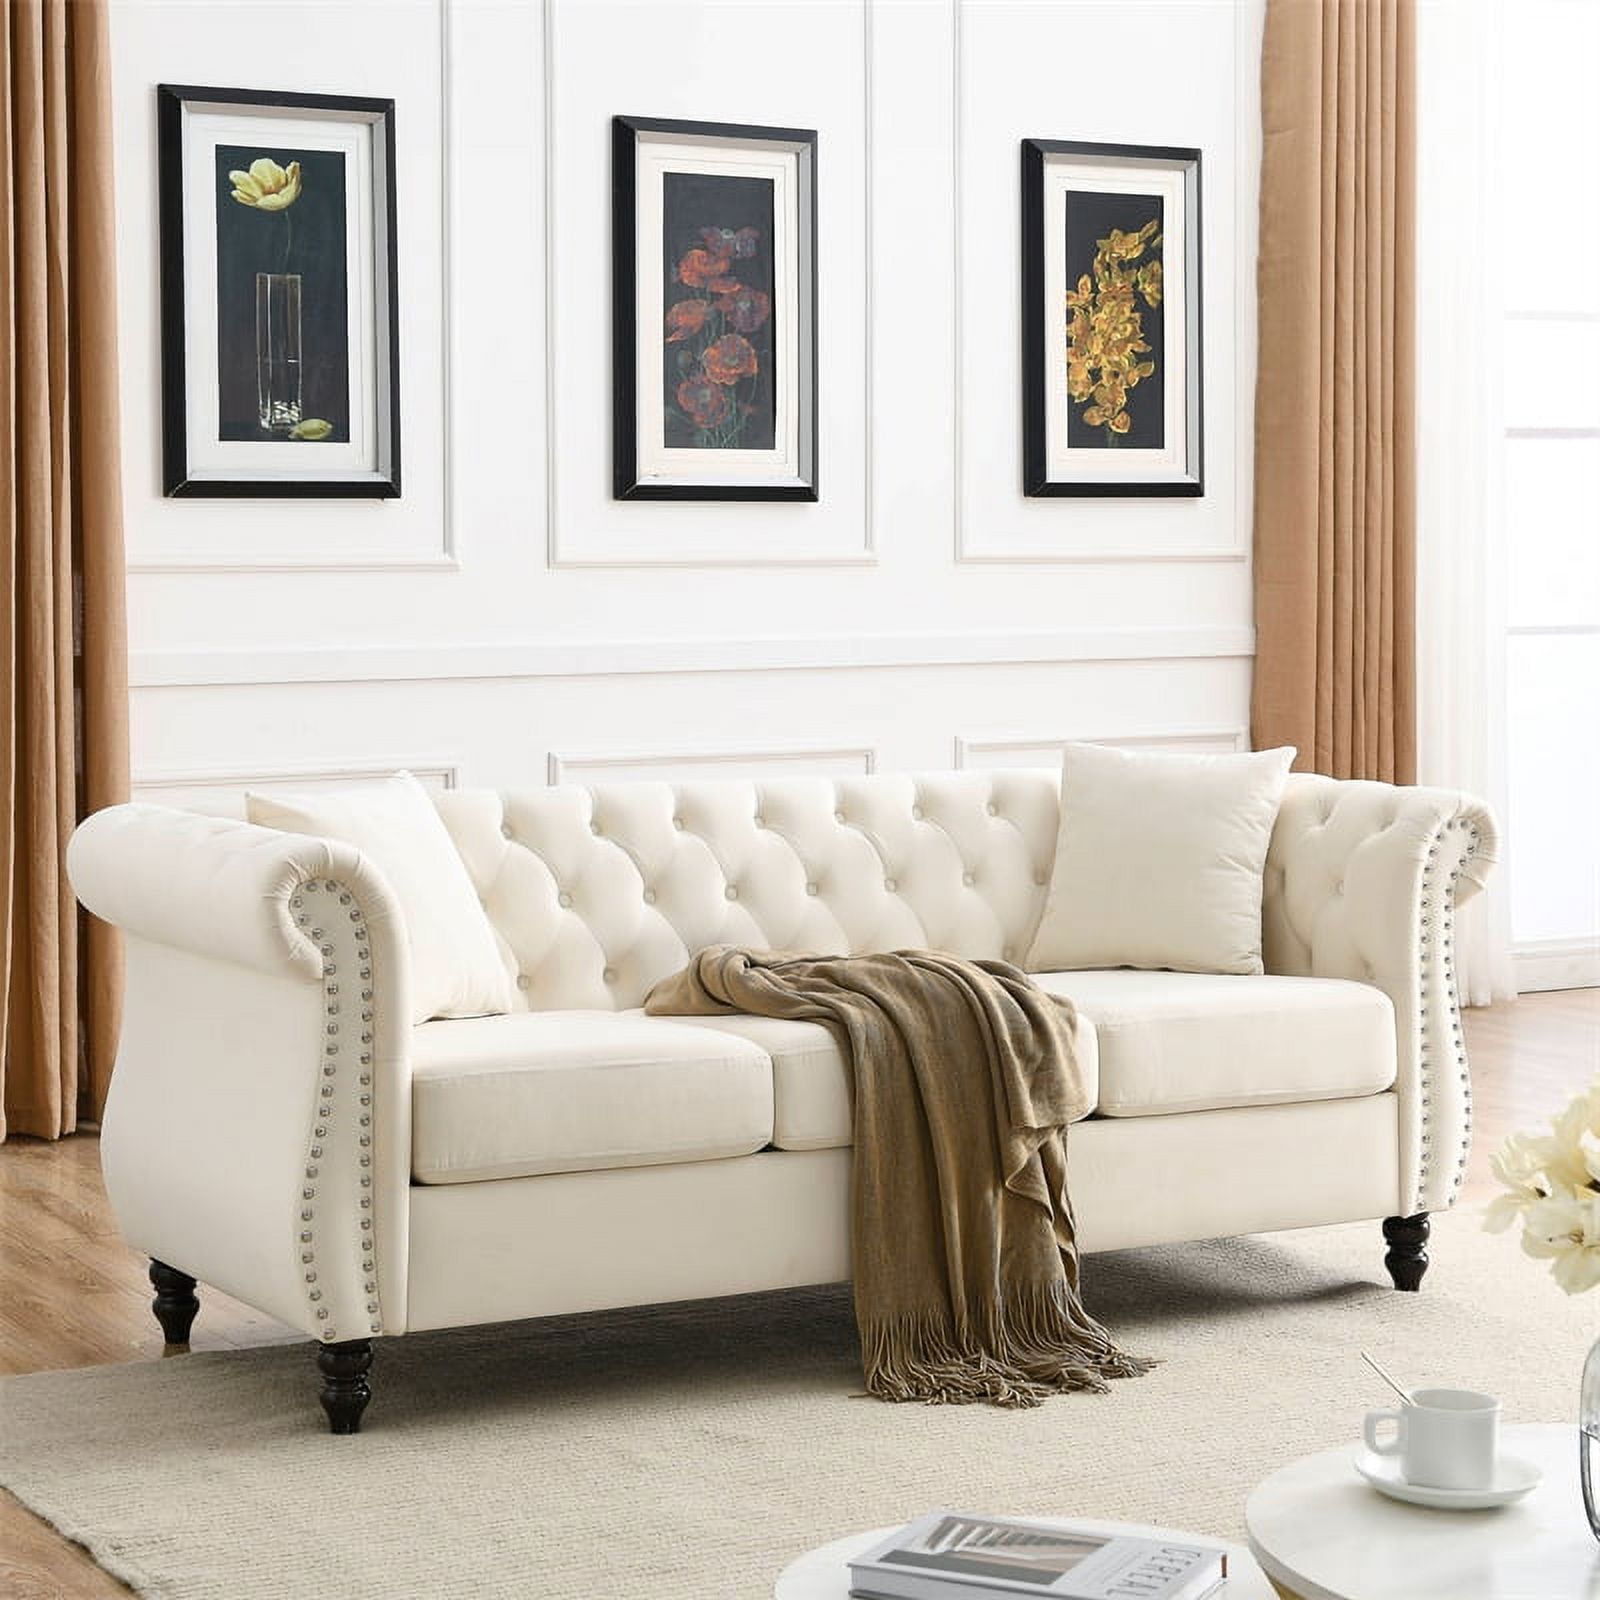 80" Chesterfield Velvet Sofa Couch With Nailhead Trim And Scroll Arms,  Modern 3 Seater Sofa Tufted Couch With Padded Seat And 2 Pillows, For  Living Room, Apartment, White – Walmart With Sofas With Nailhead Trim (View 12 of 15)